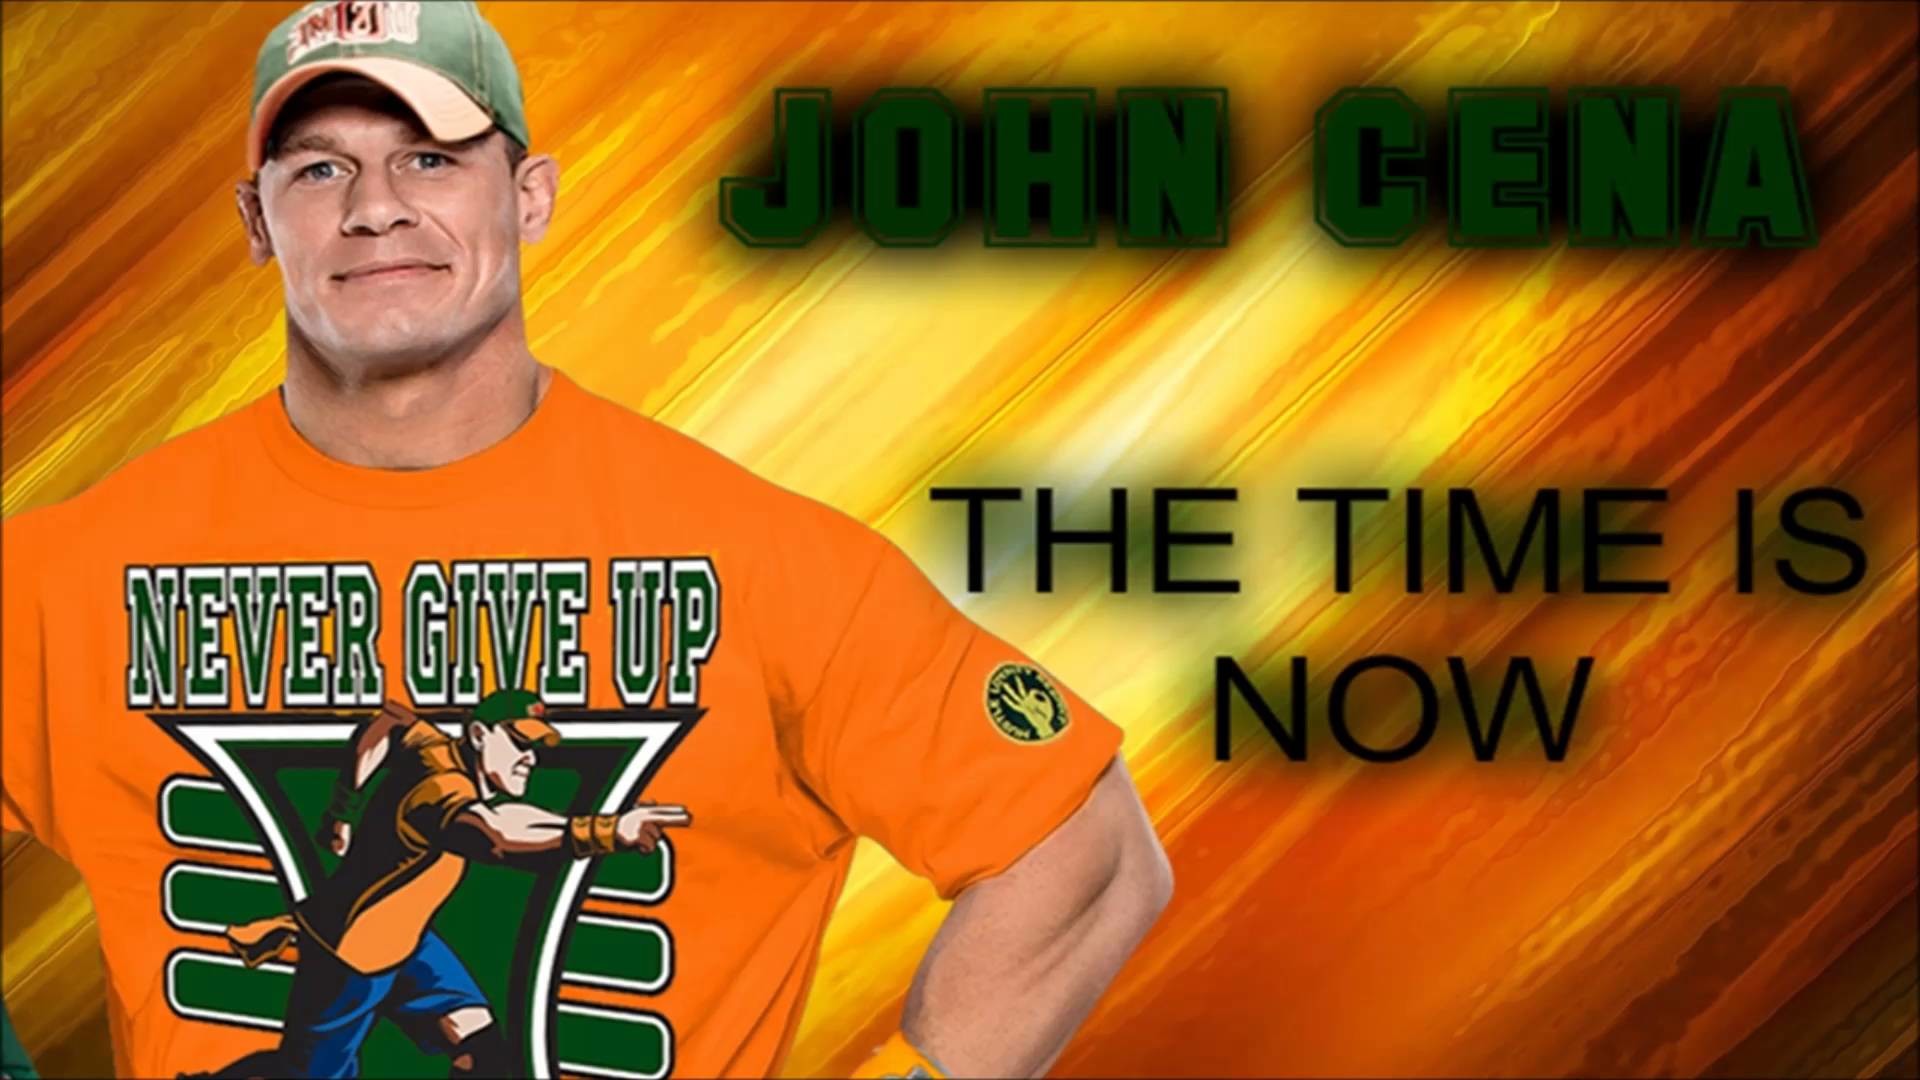 1920x1080 WWE: John Cena 6th Theme Song - {The Time Is Now} - 2016